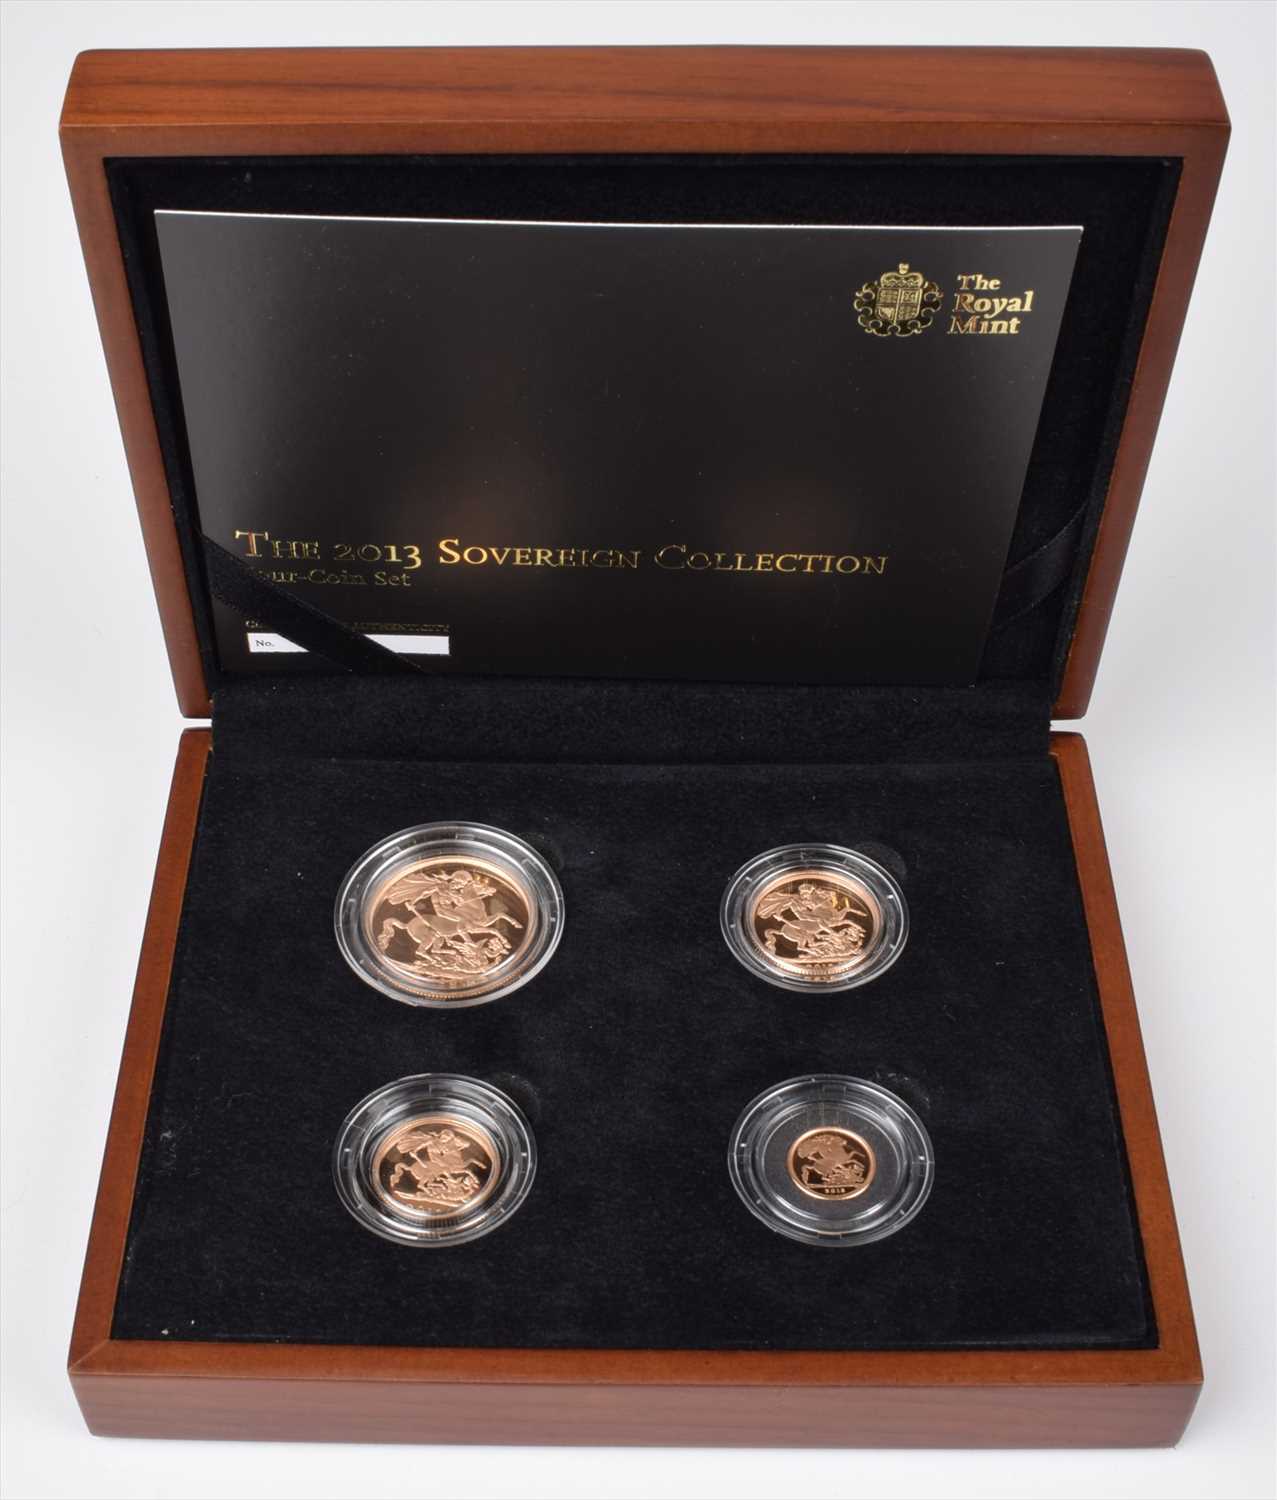 Lot 126 - Elizabeth II, United Kingdom, 2013, Gold Proof Four-Coin Sovereign Collection, Royal Mint.